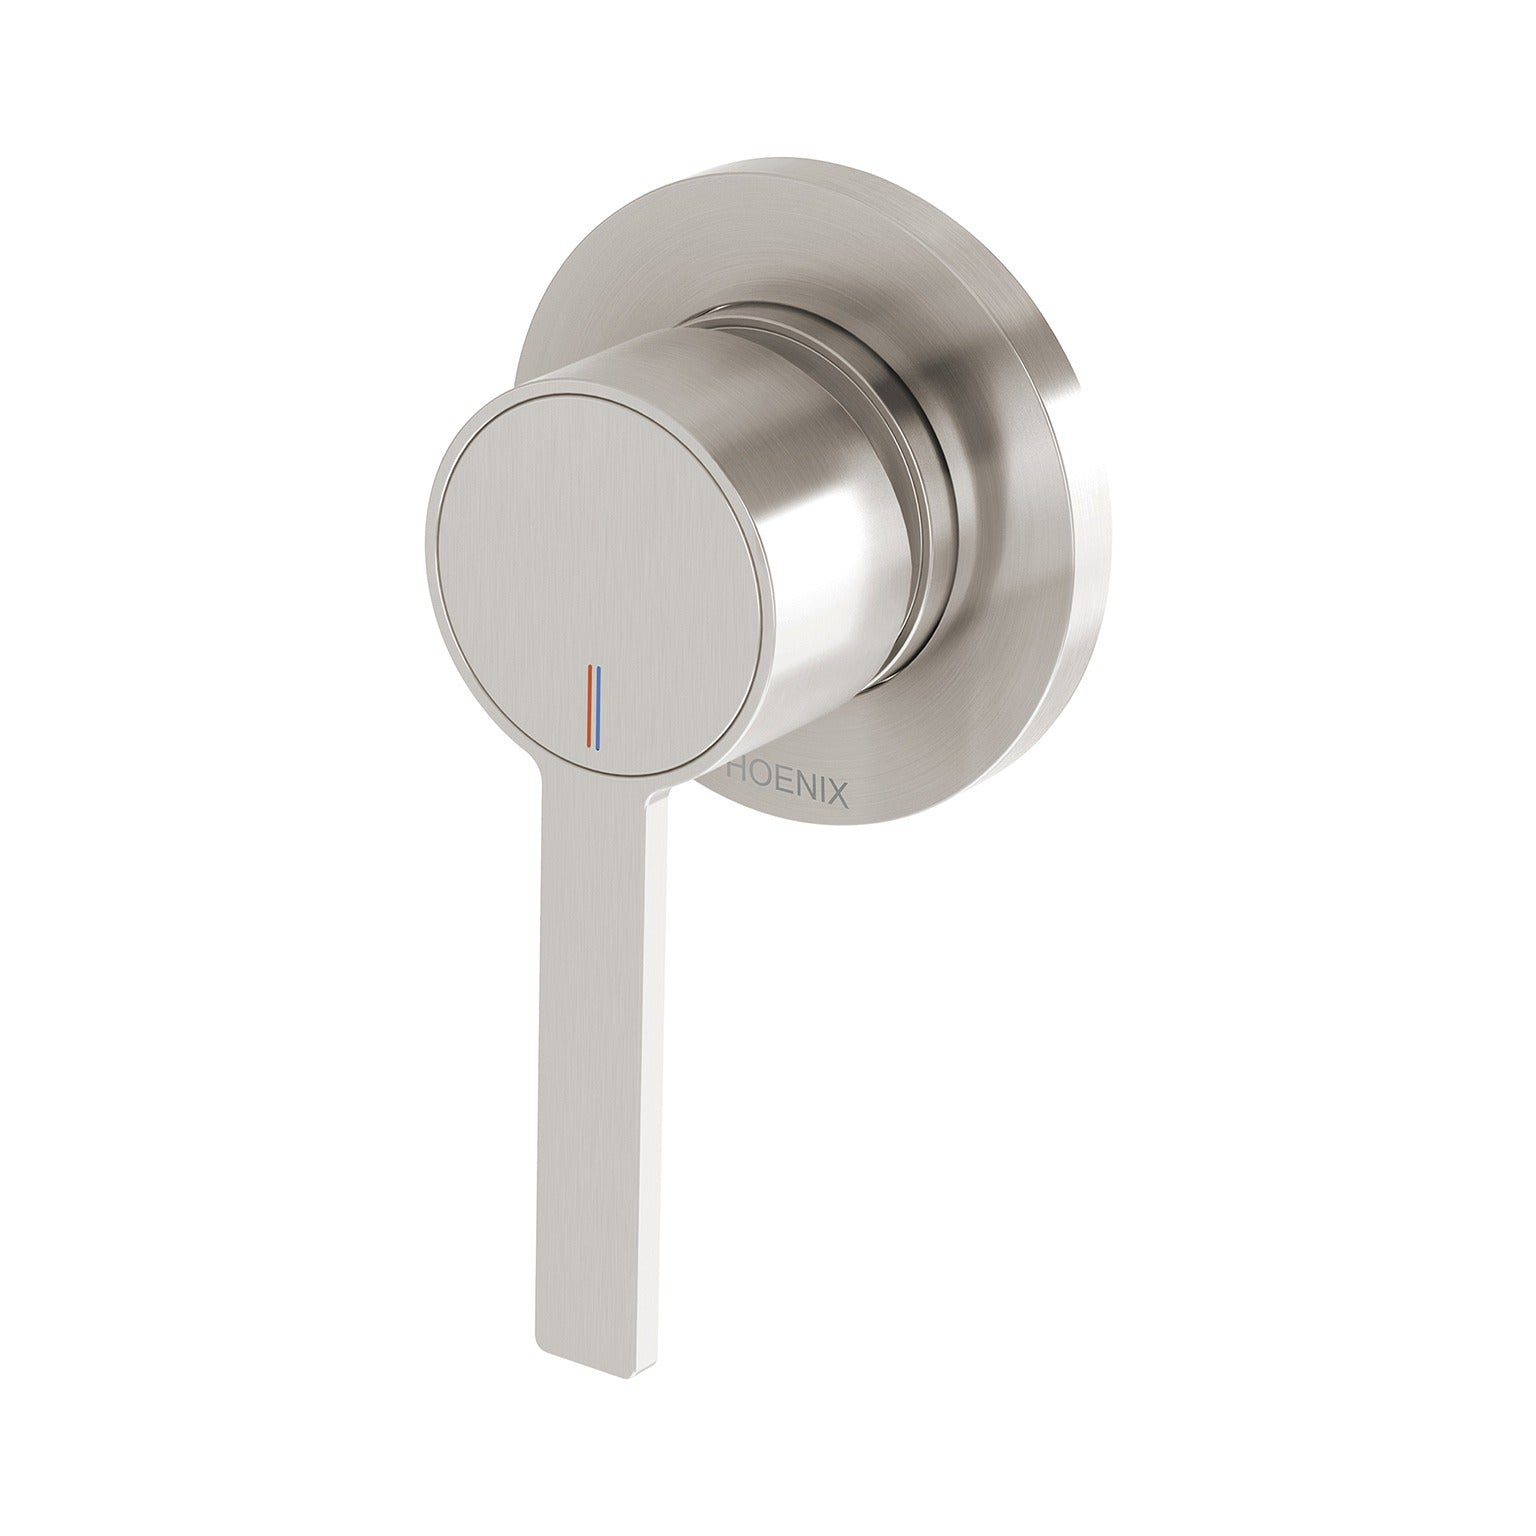 PHOENIX LEXI MKII SWITCHMIX SHOWER / WALL MIXER FIT-OFF AND ROUGH-IN KIT BRUSHED NICKEL